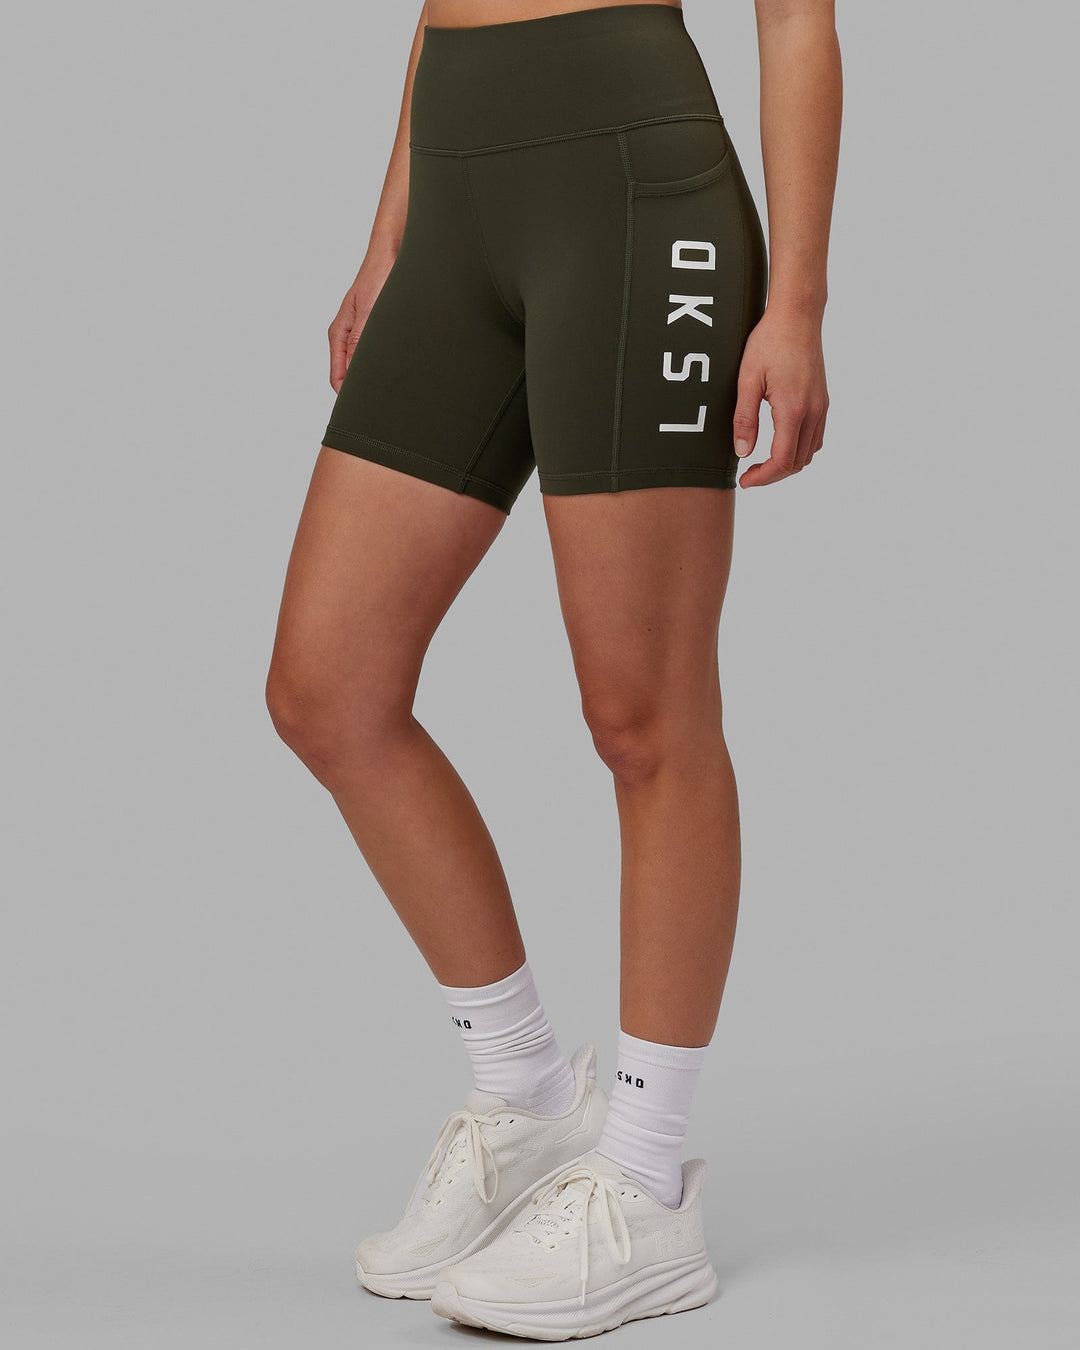 Rep Mid-Length Shorts - Forest Night